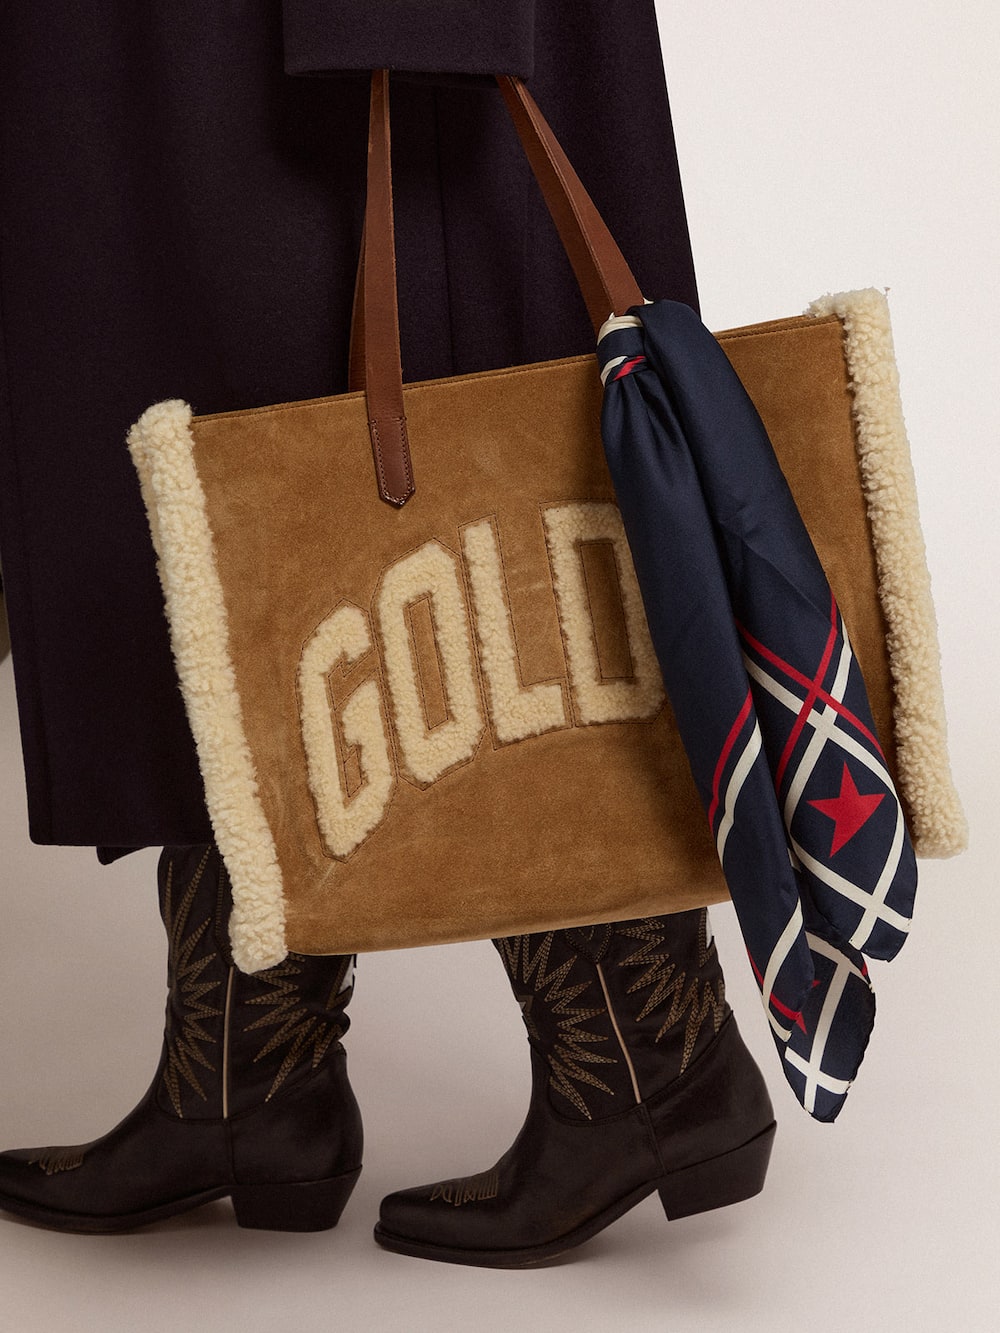 Golden Goose - East-West California Bag in suede leather with shearling in 